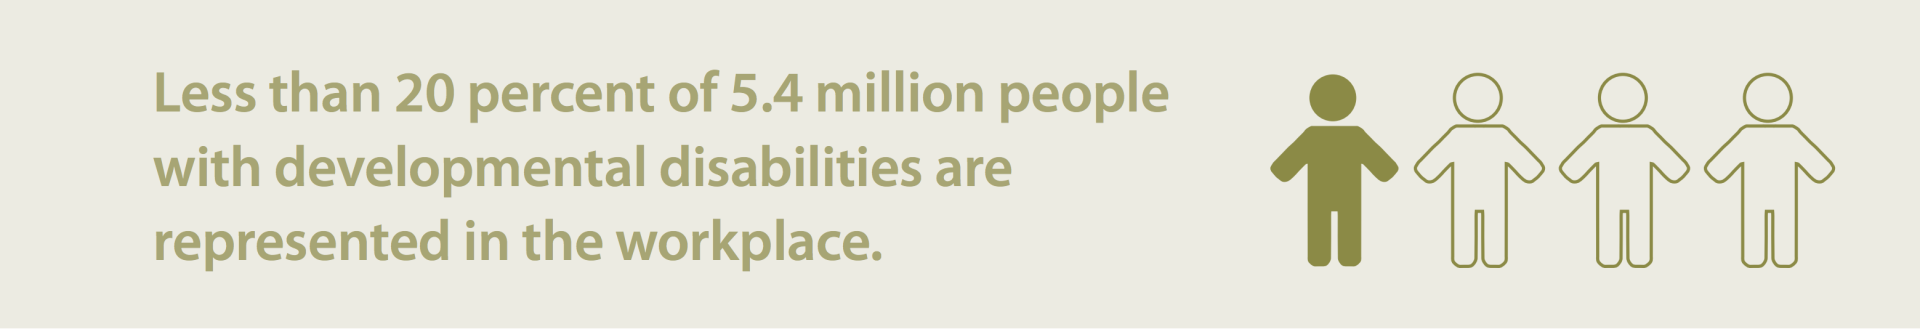 Less than 20 perfect of 5.4 million people with developmental disabilities are represented in the workplace.